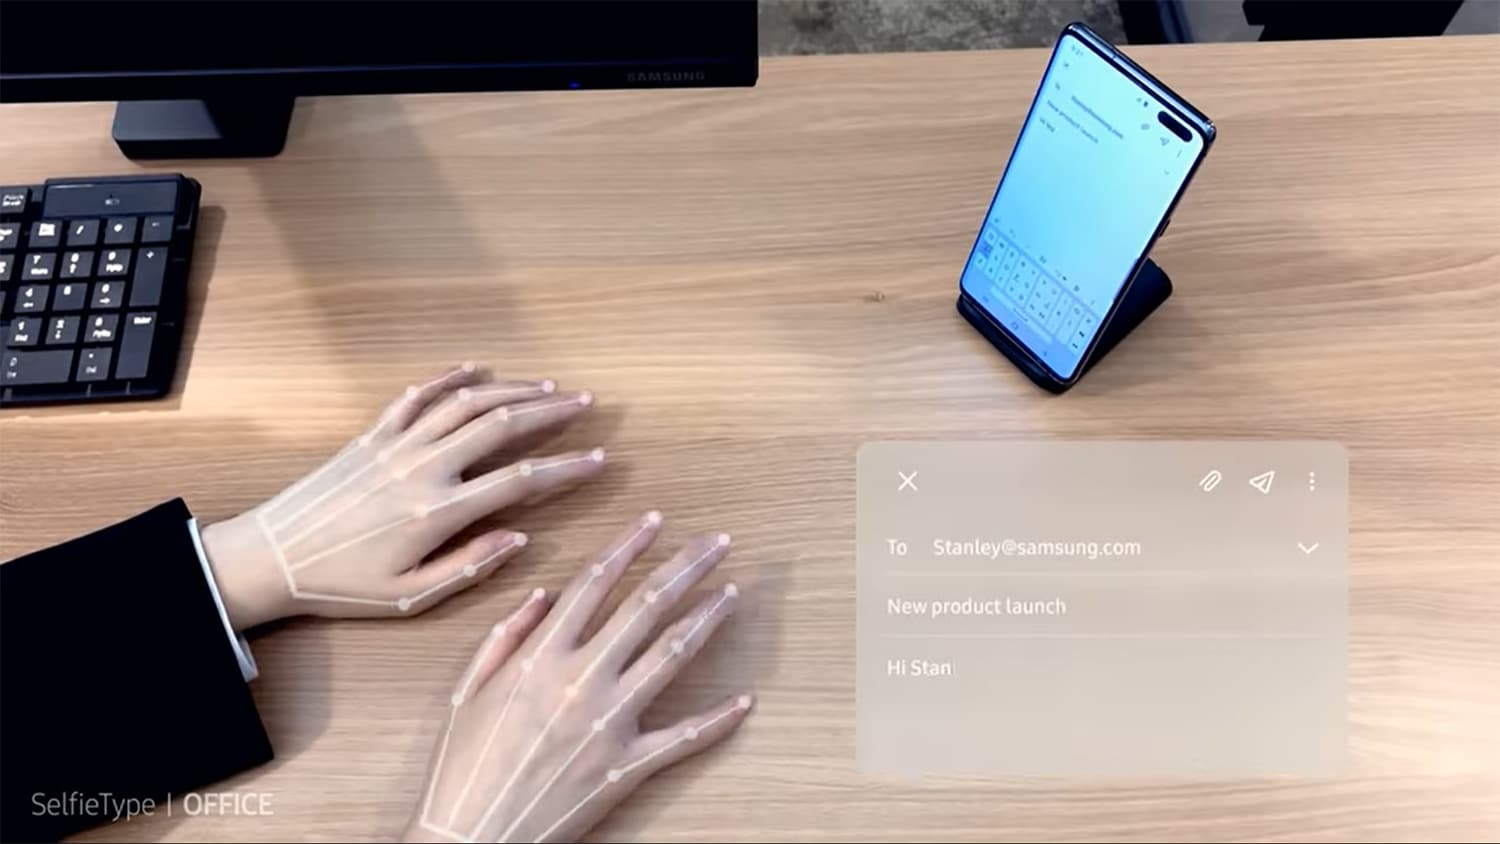 Samsung SelfieType is an invisible keyboard designed for smartphones.